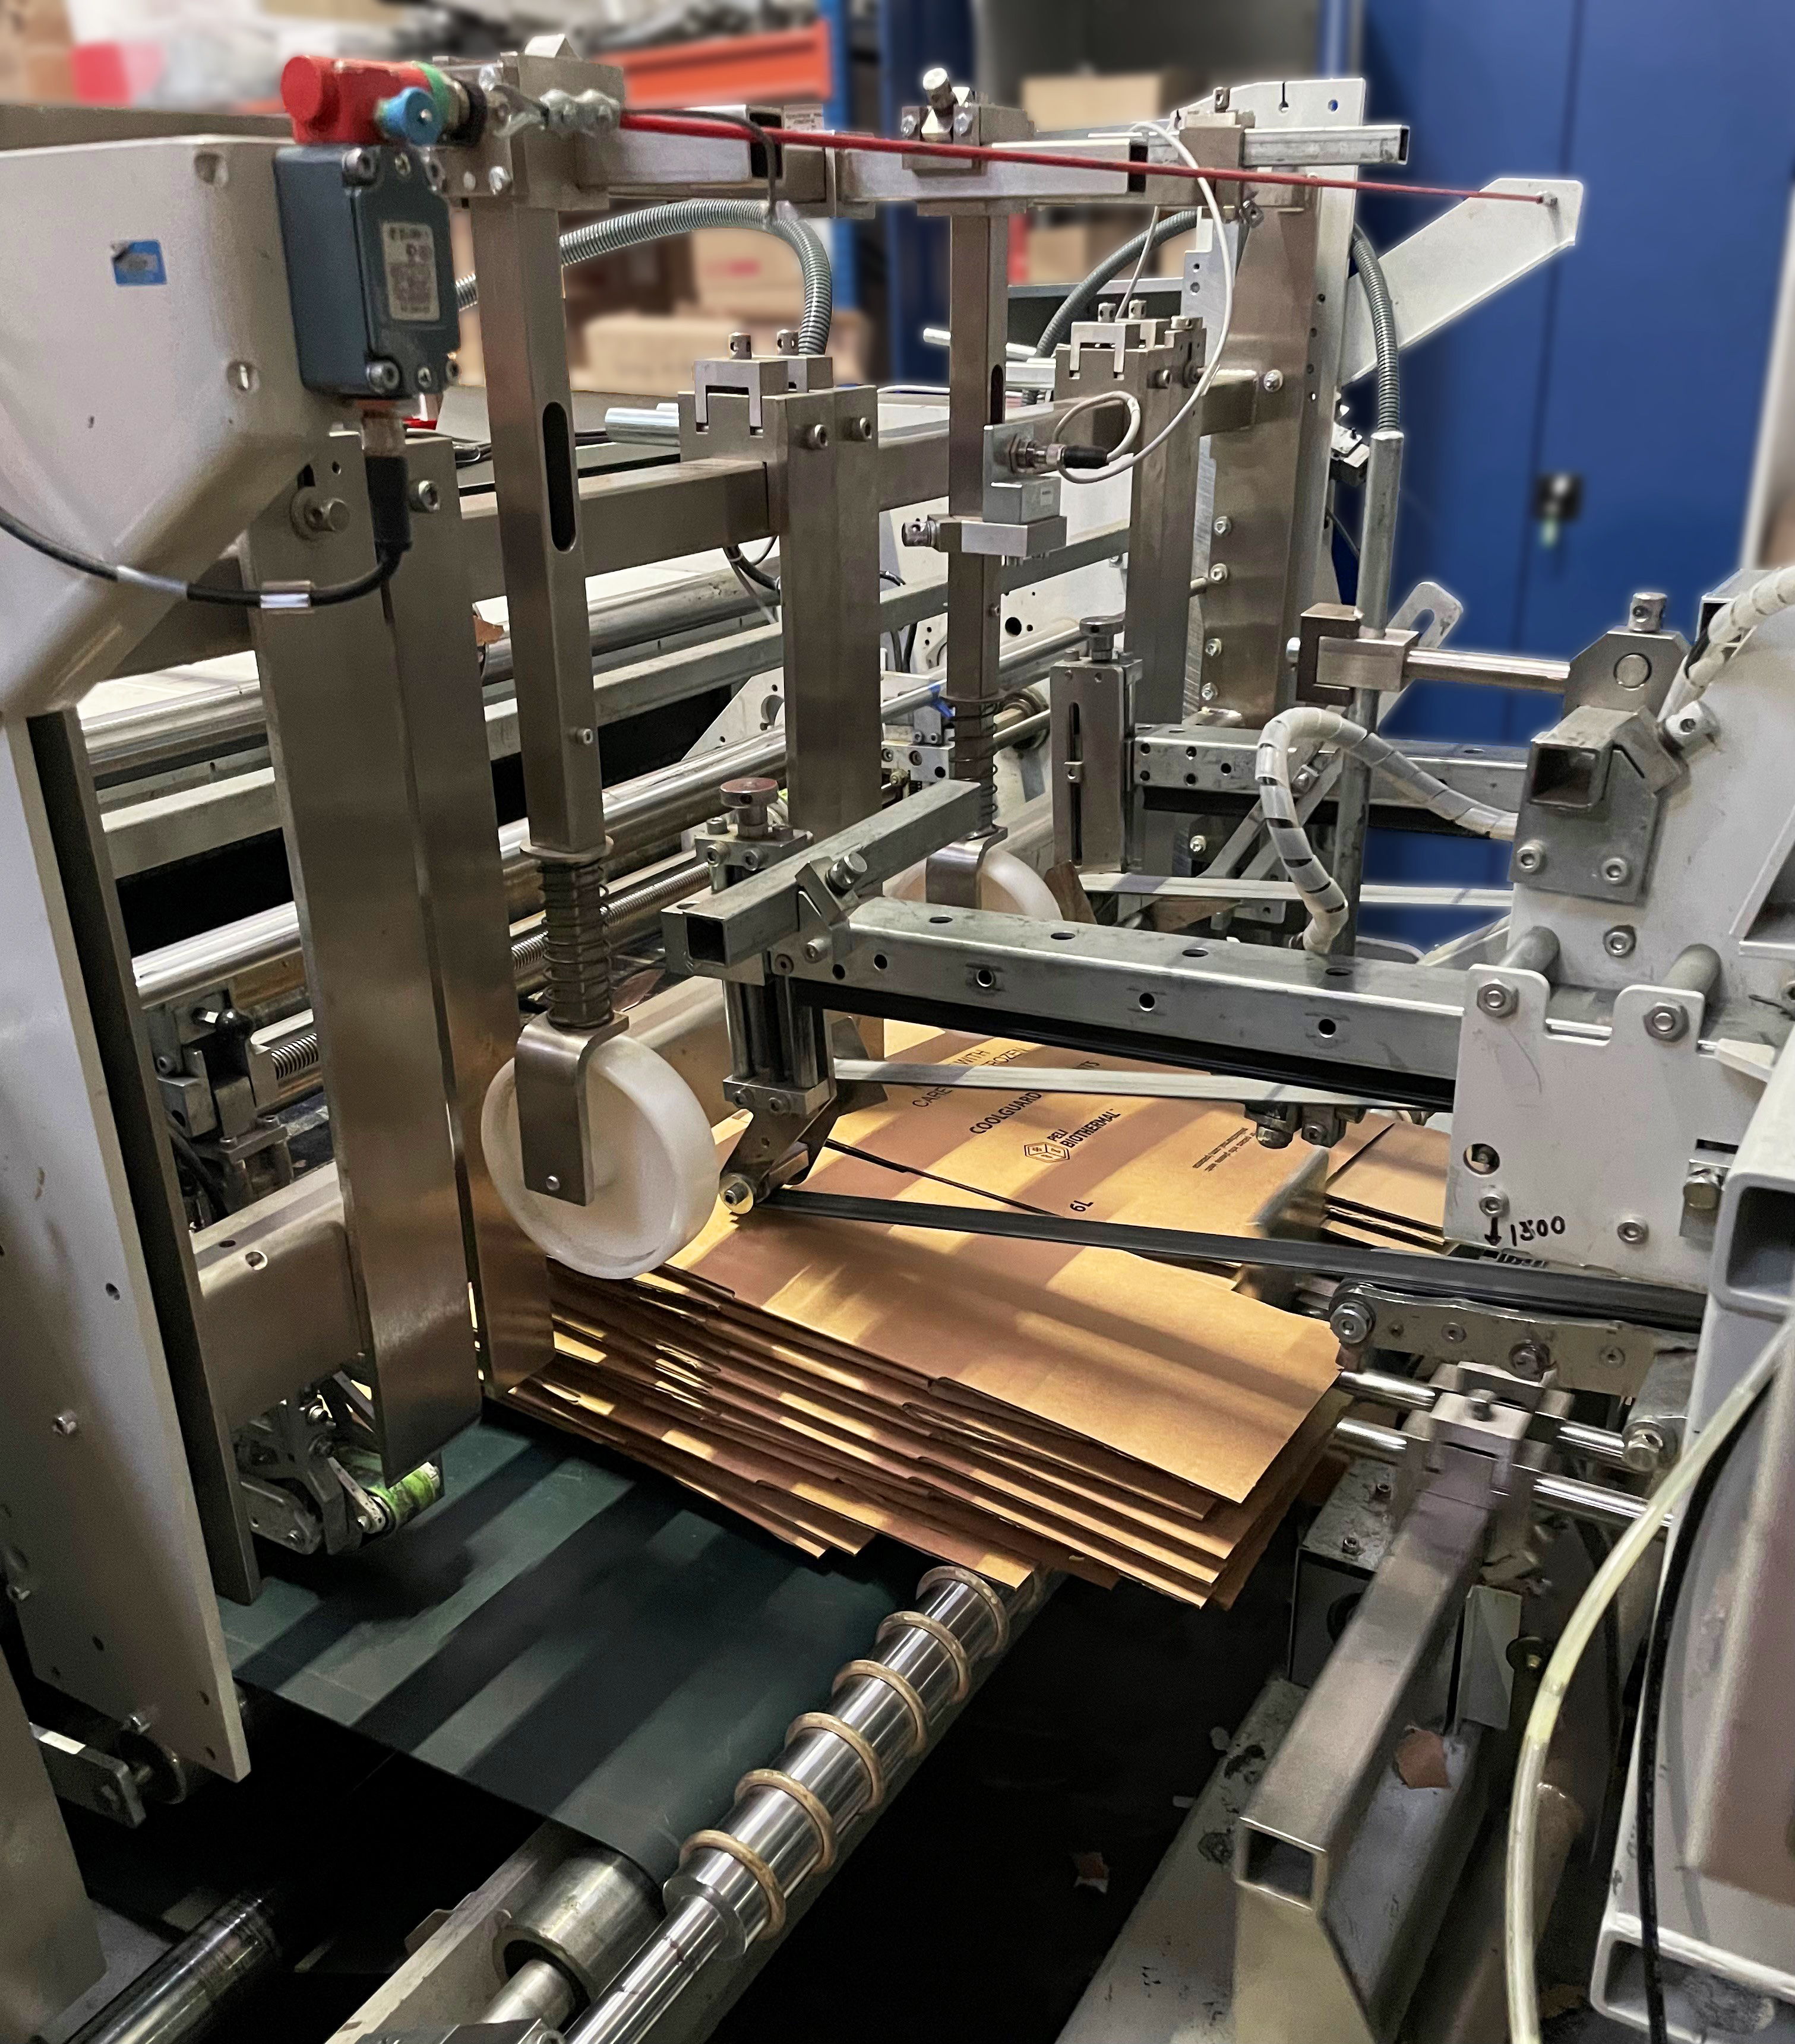 The BOBST Rear stack corrector delivery solution forms a compact stack of boxes thanks to its support wheel and its stopper. The boxes are thus upright and neatly arranged, and the creases are corrected, allowing for increased production speed on the upstream part of the machine.